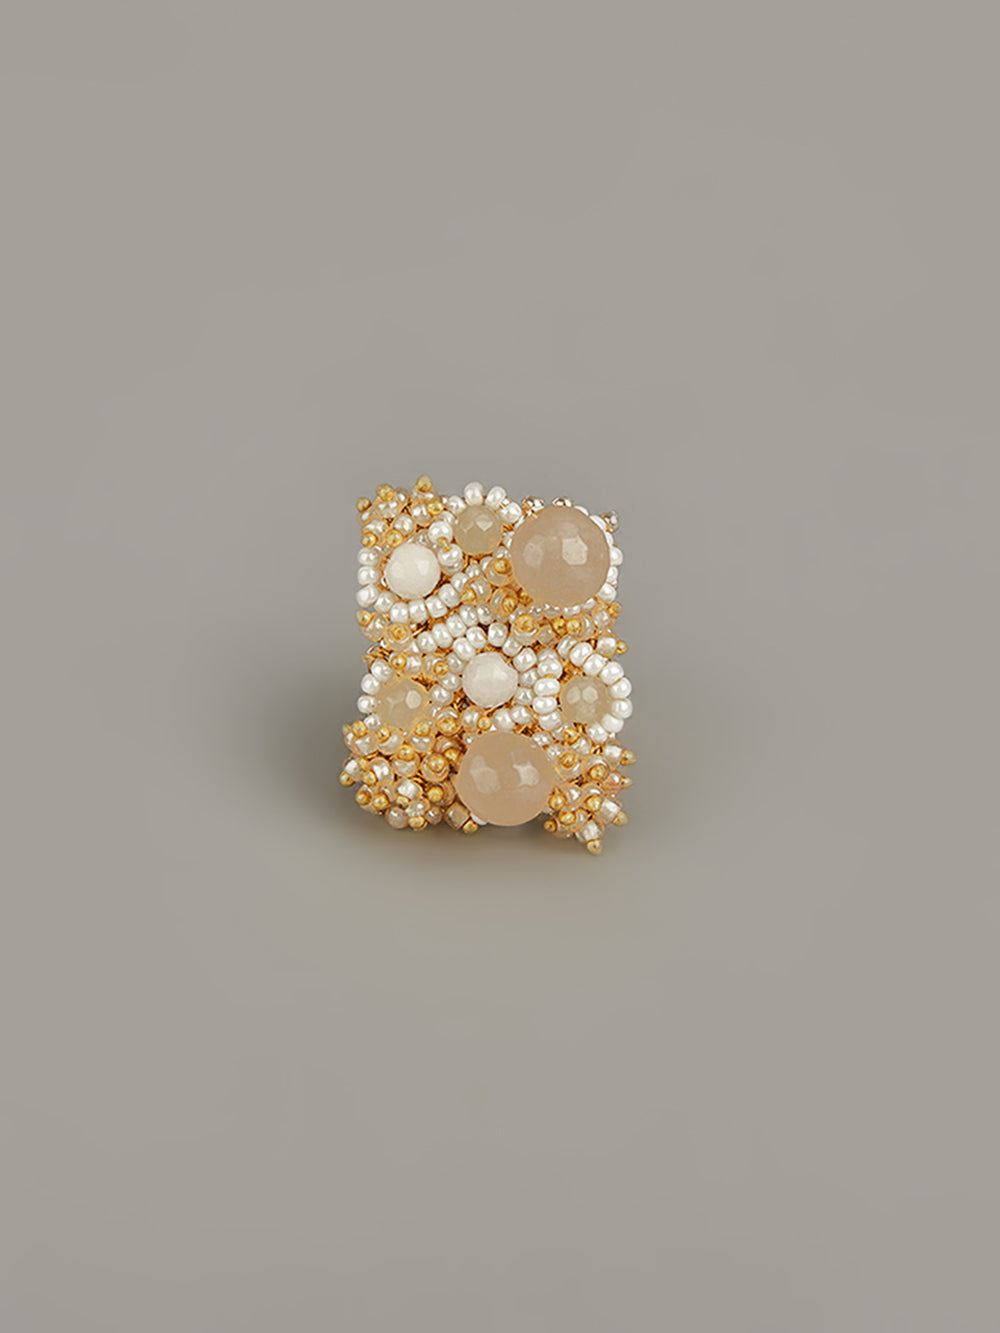 Amama,Handcrafted Stone Studded Beige & Gold Ring